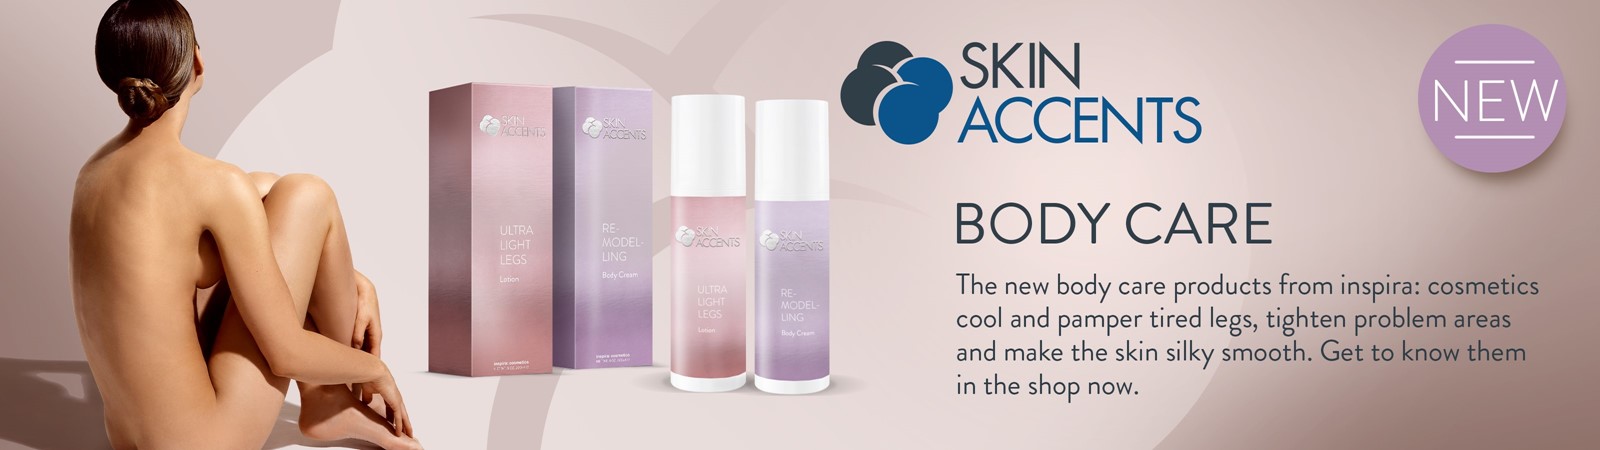 Skin Accents Body